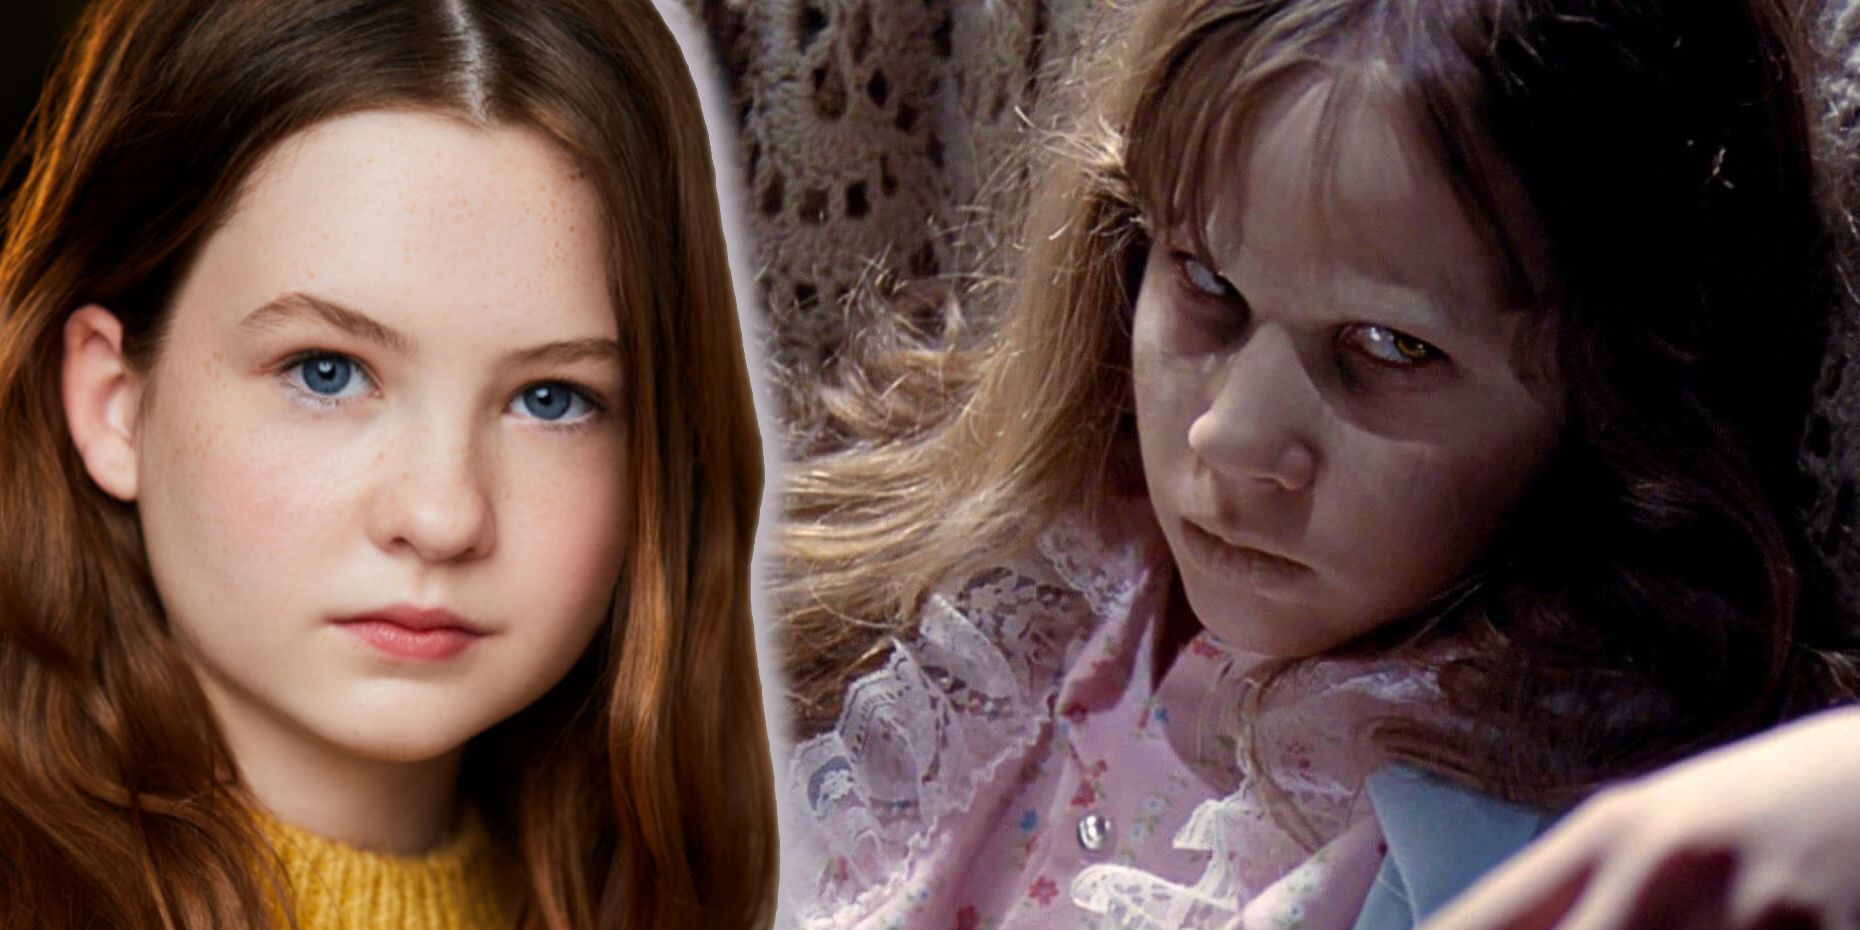 The Exorcist Reboot Casts Matilda Star as Its Possessed Lead